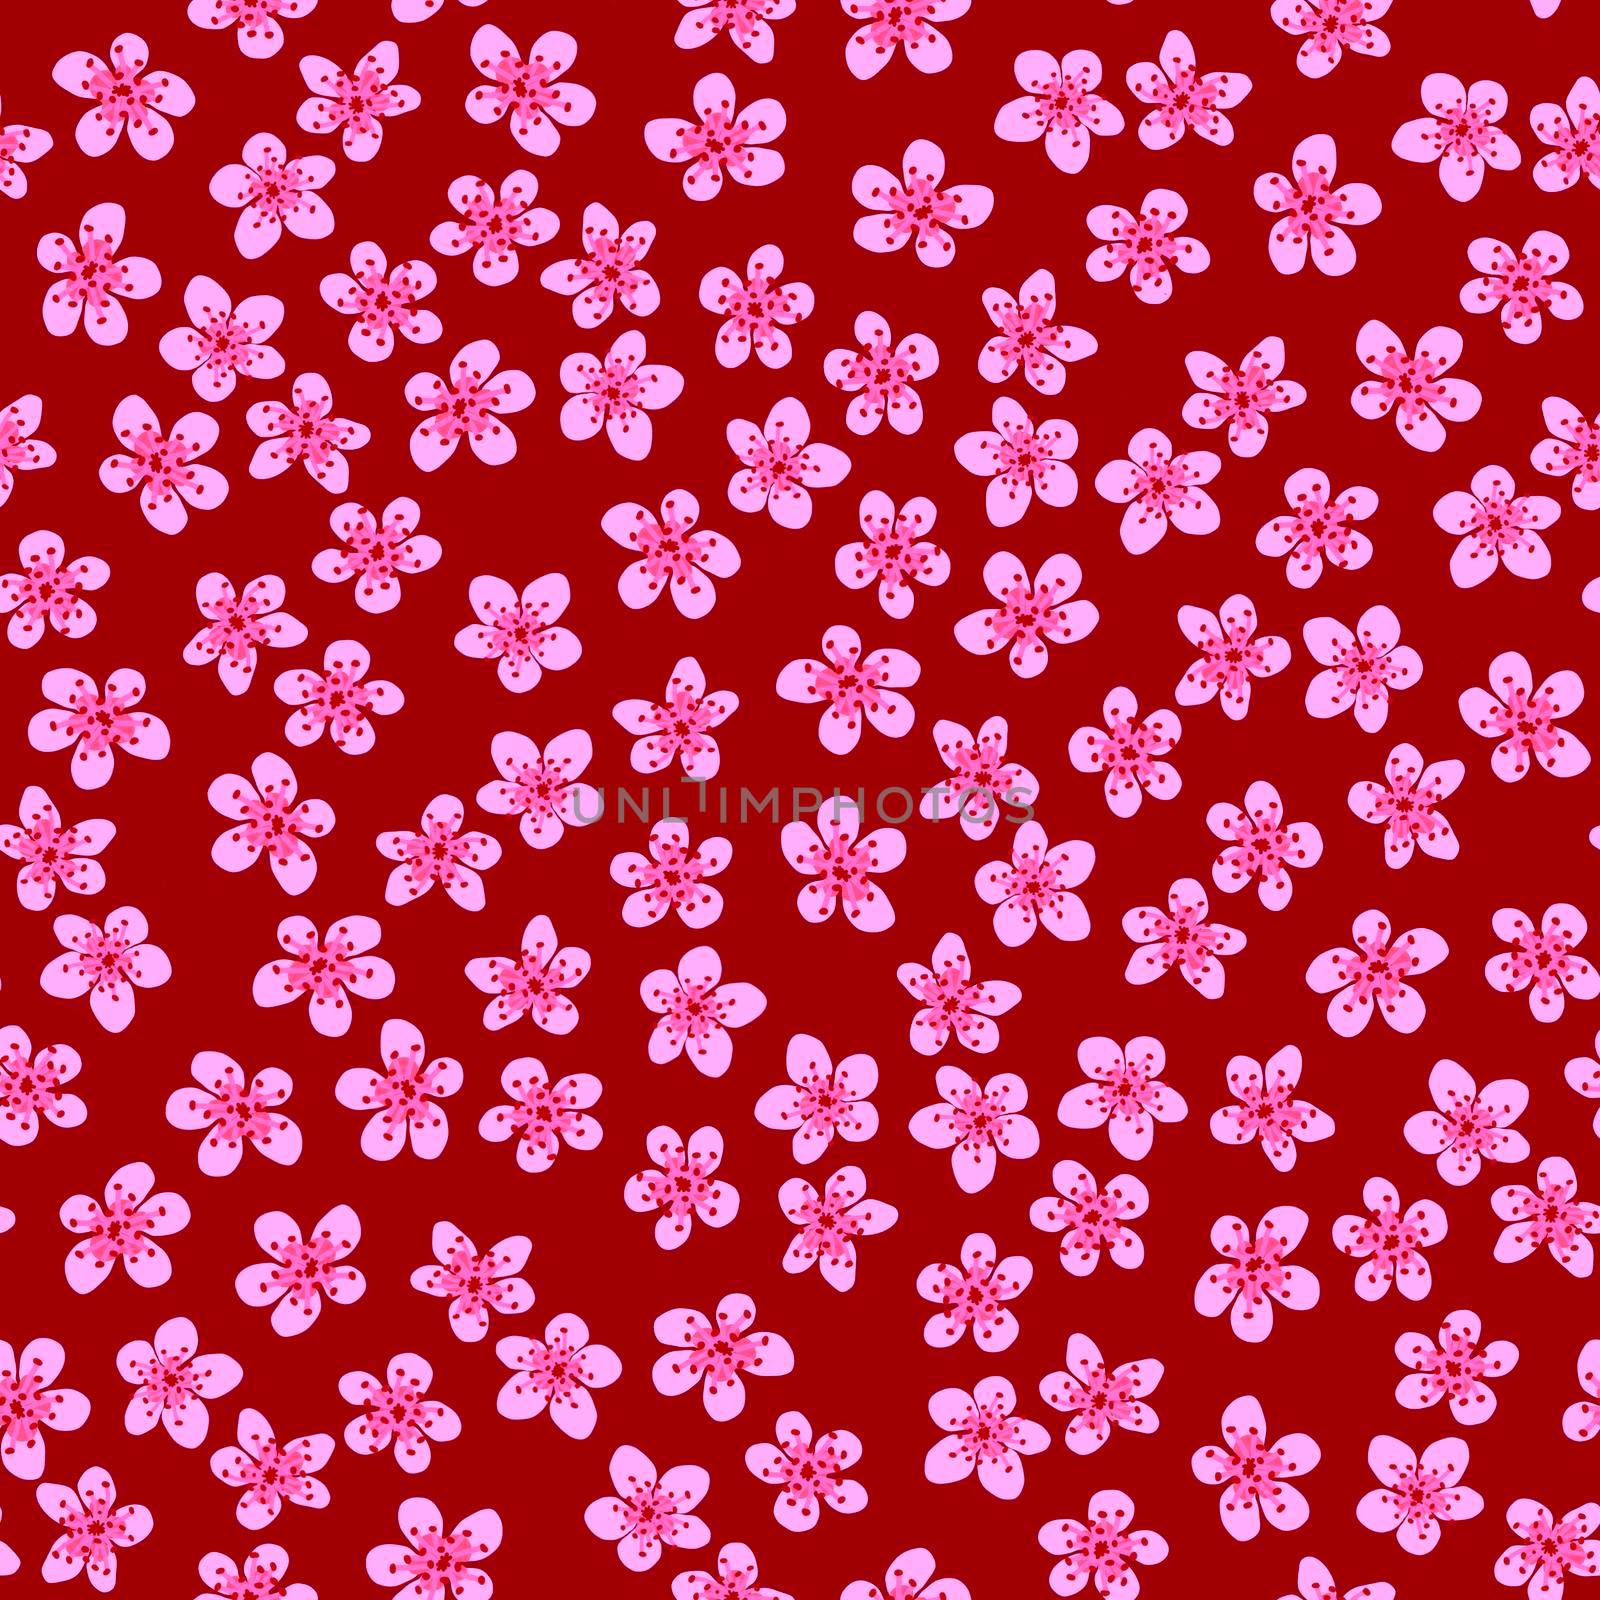 Seamless pattern with blossoming Japanese cherry sakura for fabric, packaging, wallpaper, textile decor, design, invitations, print, gift wrap, manufacturing. Pink flowers on red background